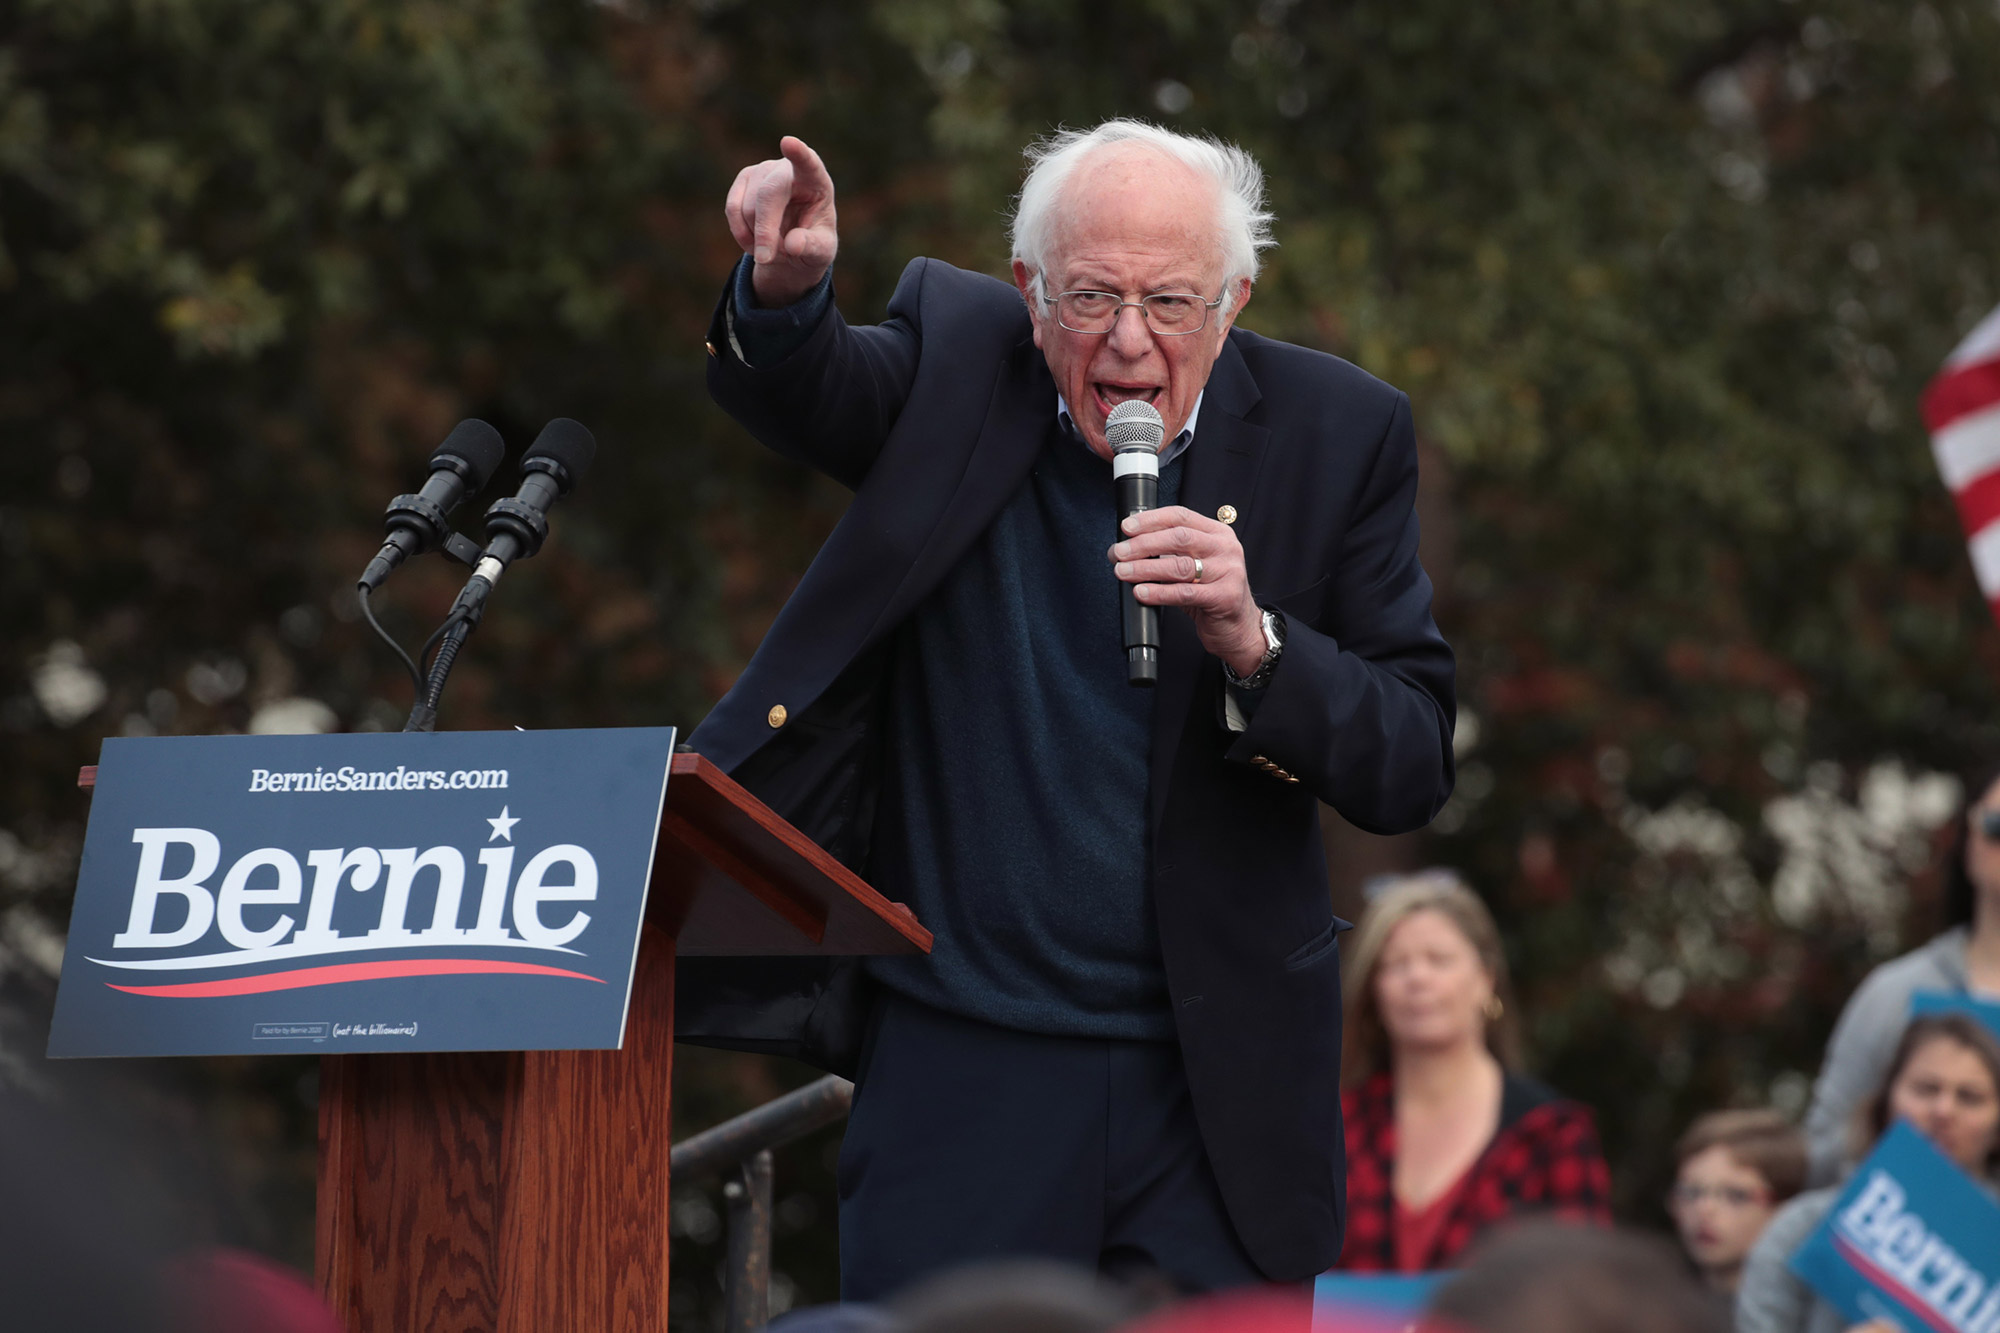 Bernie Sanders speaks to guests during a campaign rally in Columbia, South Carolina, Feb. 28.